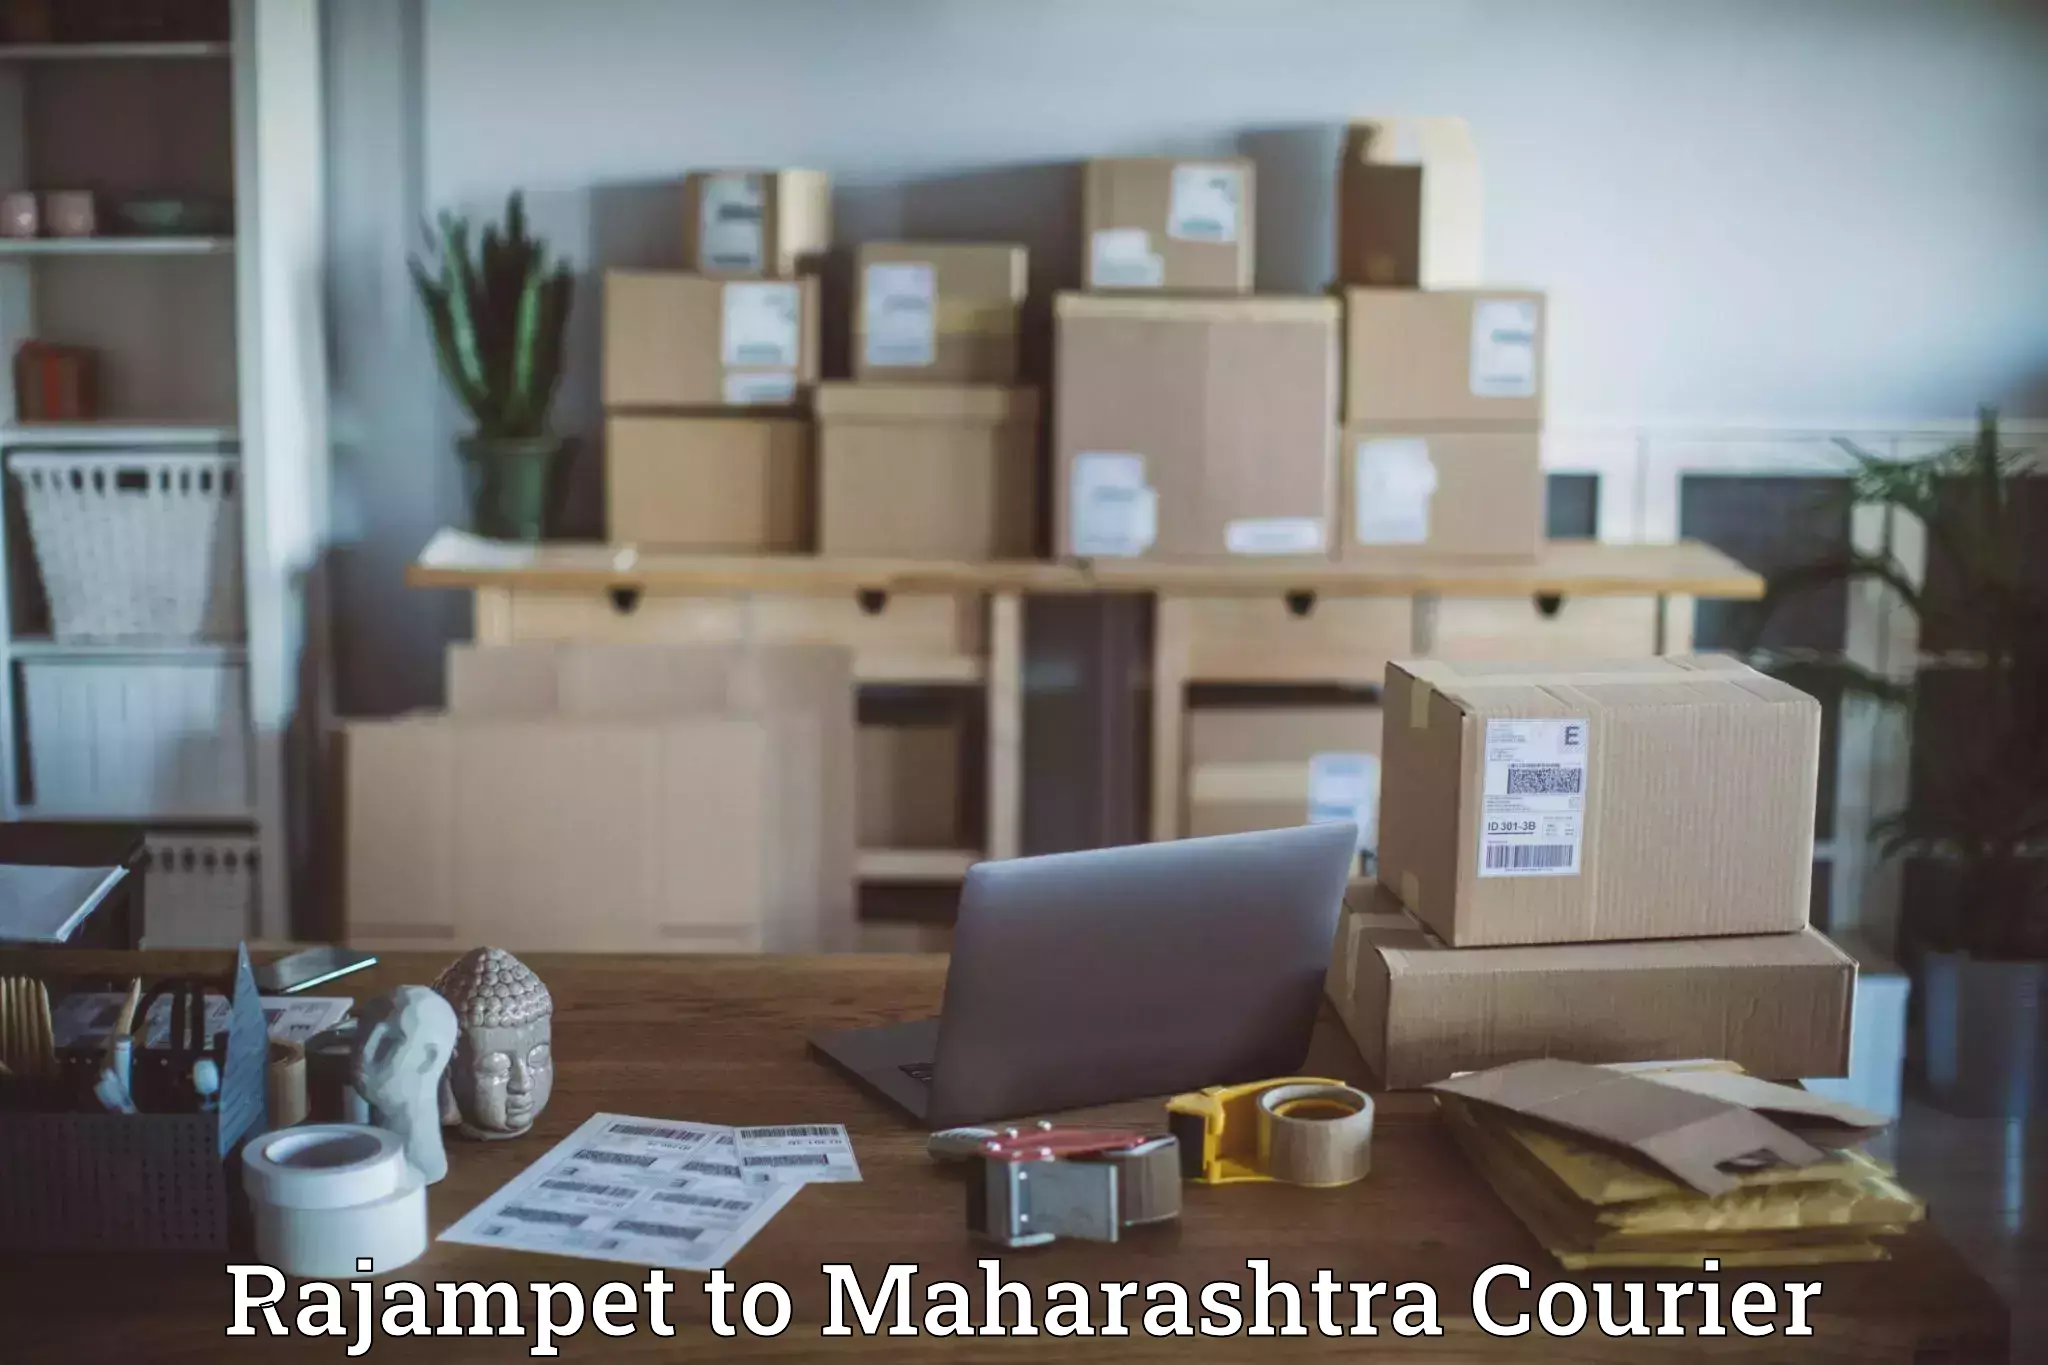 State-of-the-art courier technology Rajampet to Ahmedpur